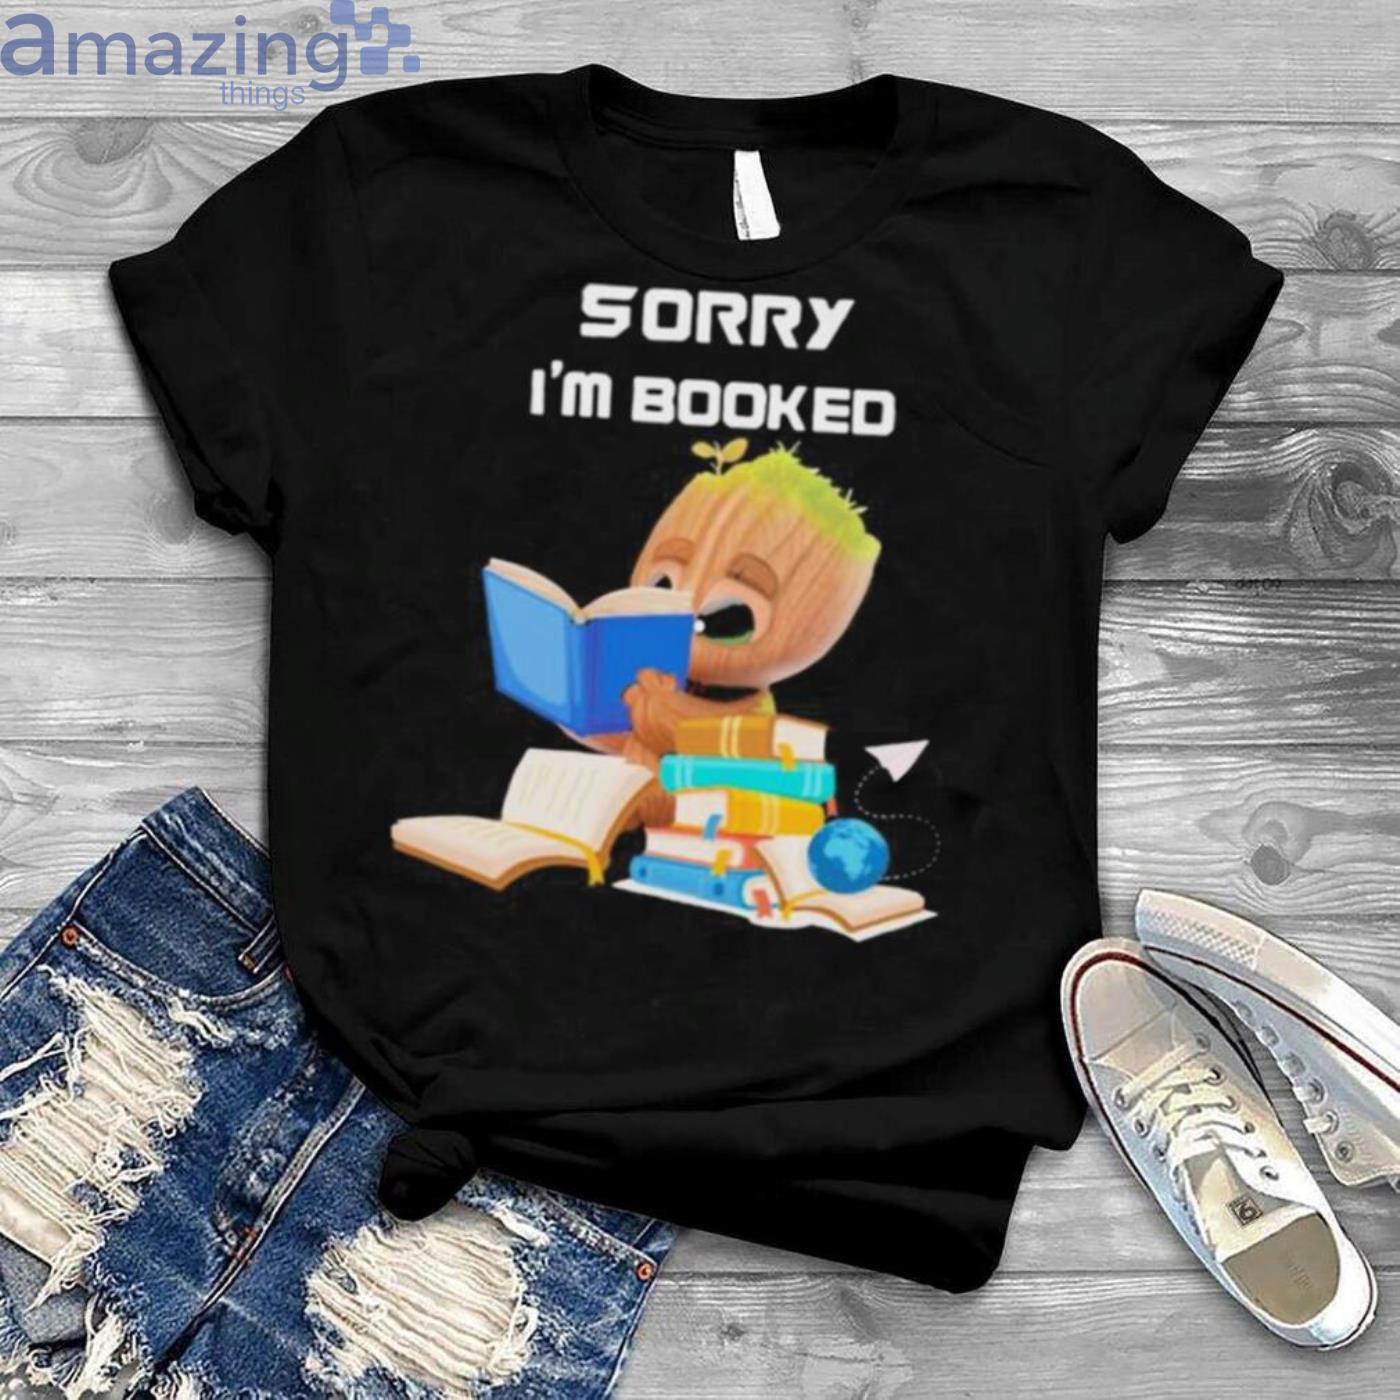 Sorry Im Booked Baby Groot Shirt Product Photo 1